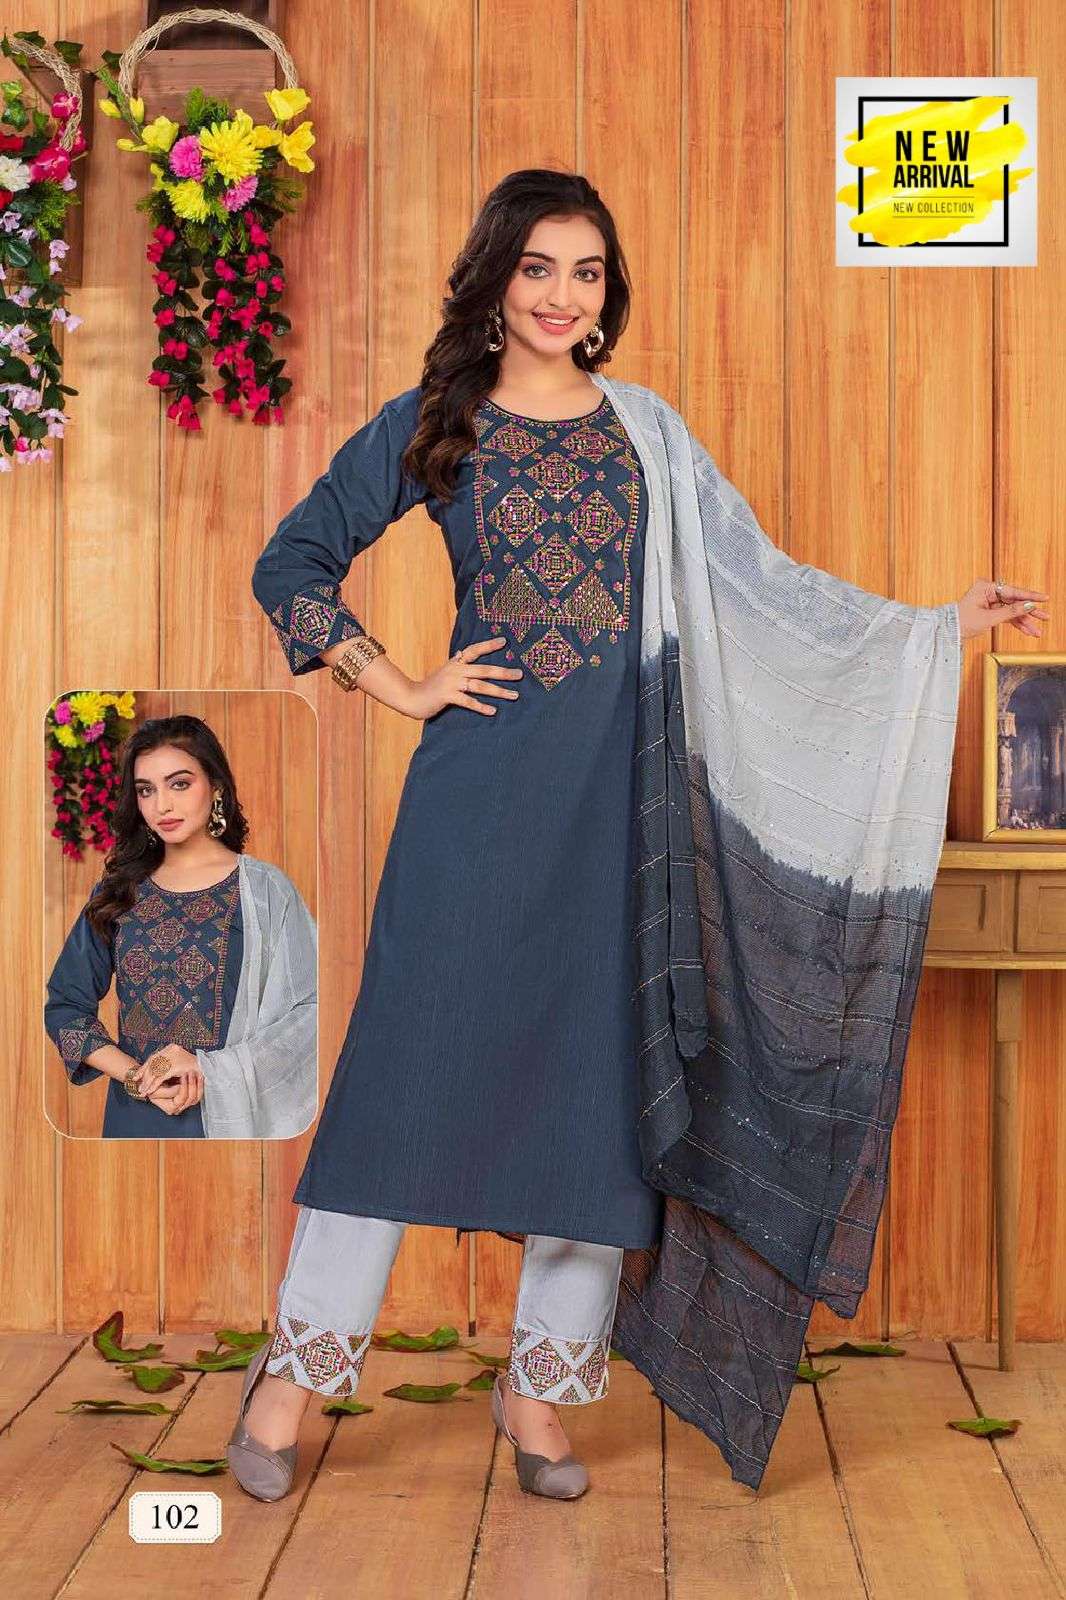 New Arrivals: Styletag Amithi Kurtis Best Seller Collection – Suzy Smith